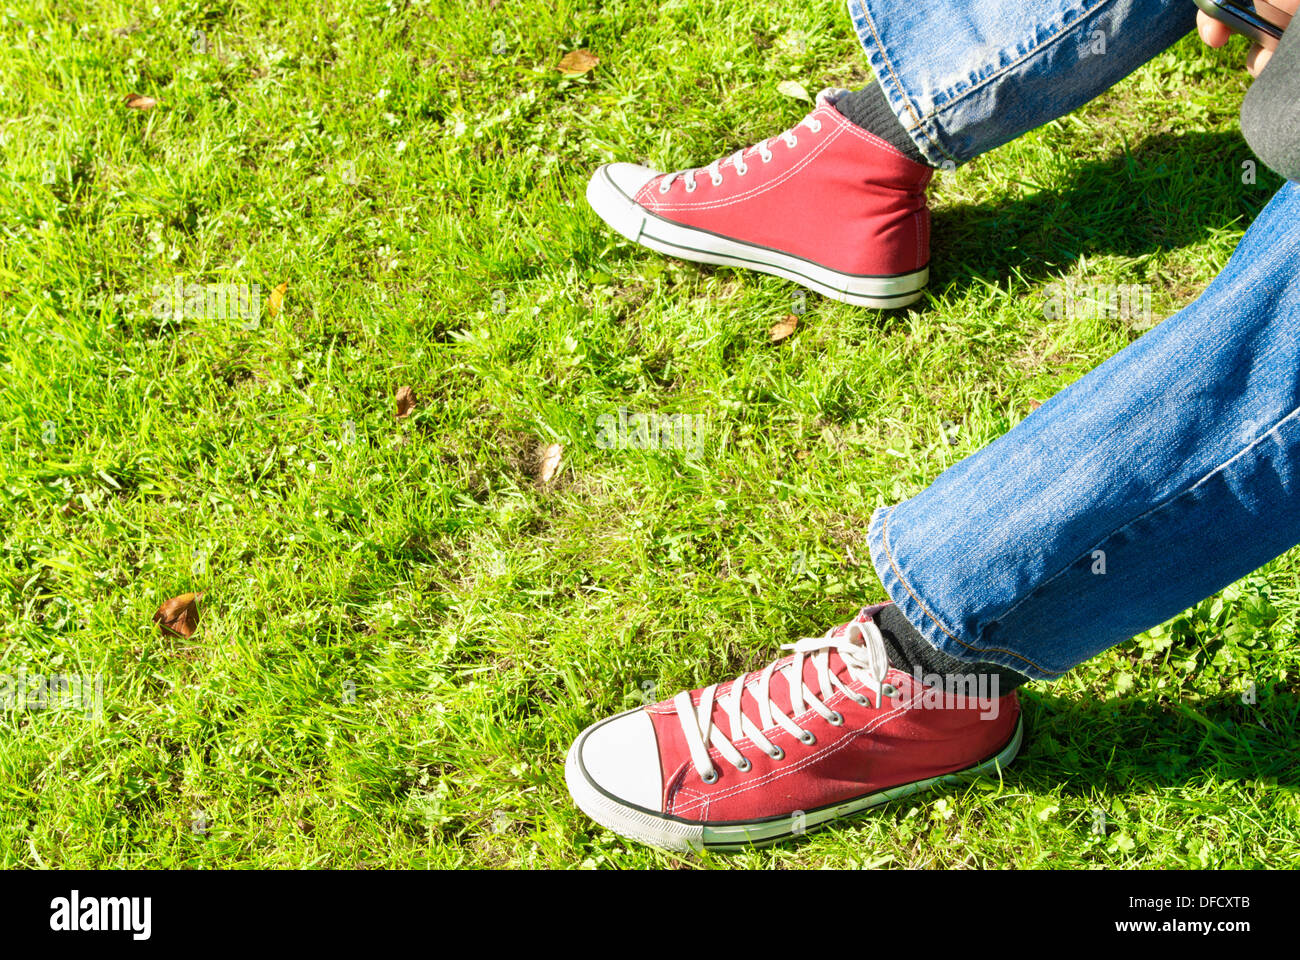 Legs of a young adult relaxing on grass. Mobile phone in hand Stock Photo